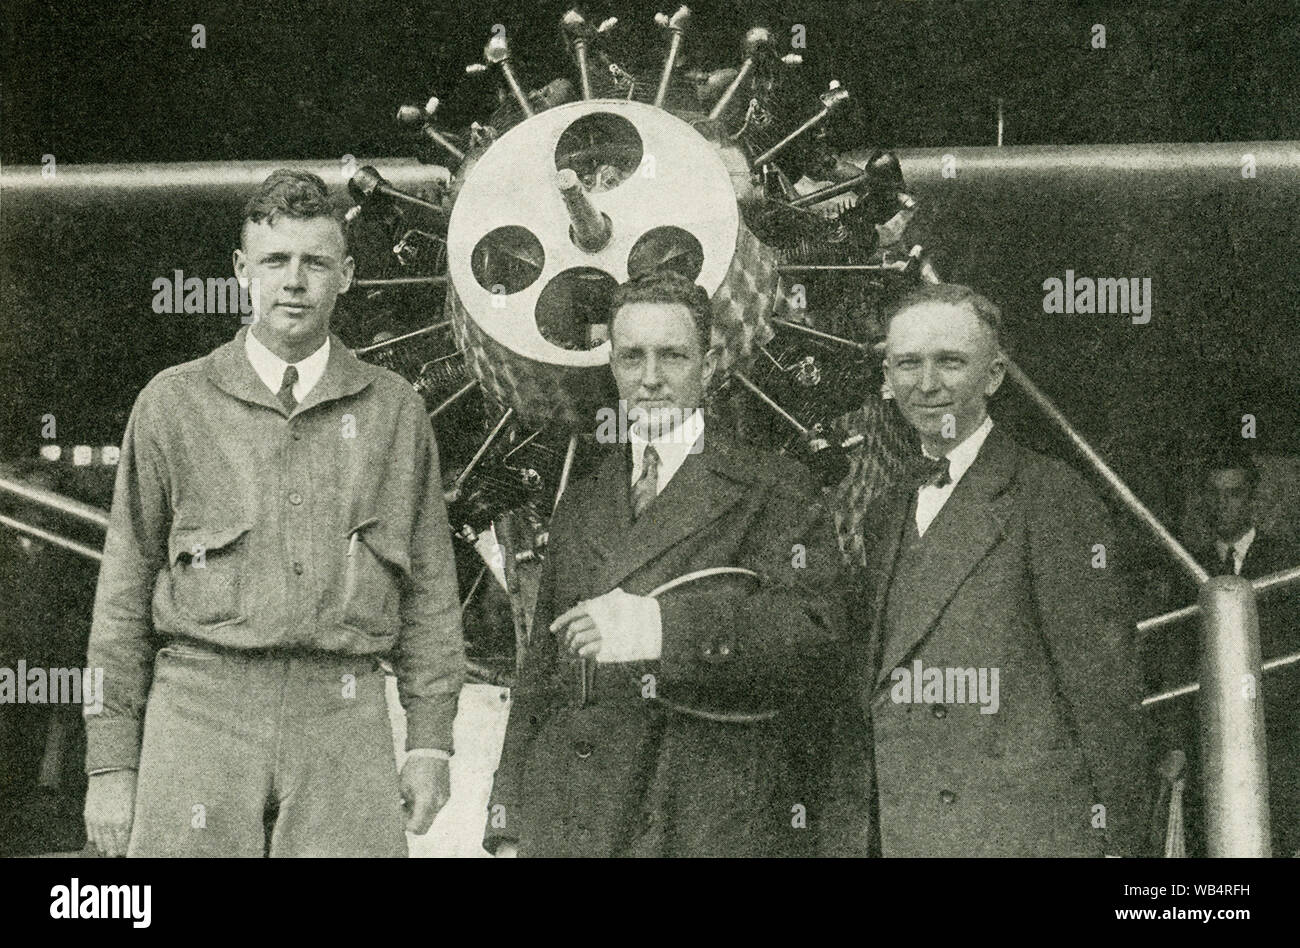 The caption reads:  Three Transatlantic Flyers. At the left is Colonel Charles A. Lindbergh, who was the first to fly from New York to Paris, May 20-21, 1927. In the center is Commander Richard E. Byrd, who was first to fly to the Pole, and who, with Bert Acosta, Bernt Balchen, and George O. Noville, flew from New York to France, June 29-30, 1927. At the right is Clarence  D. Chamberlain, who with Charles A Levine, flew from New York to Eisleben, Germany, June 4-6, 1927. Stock Photo